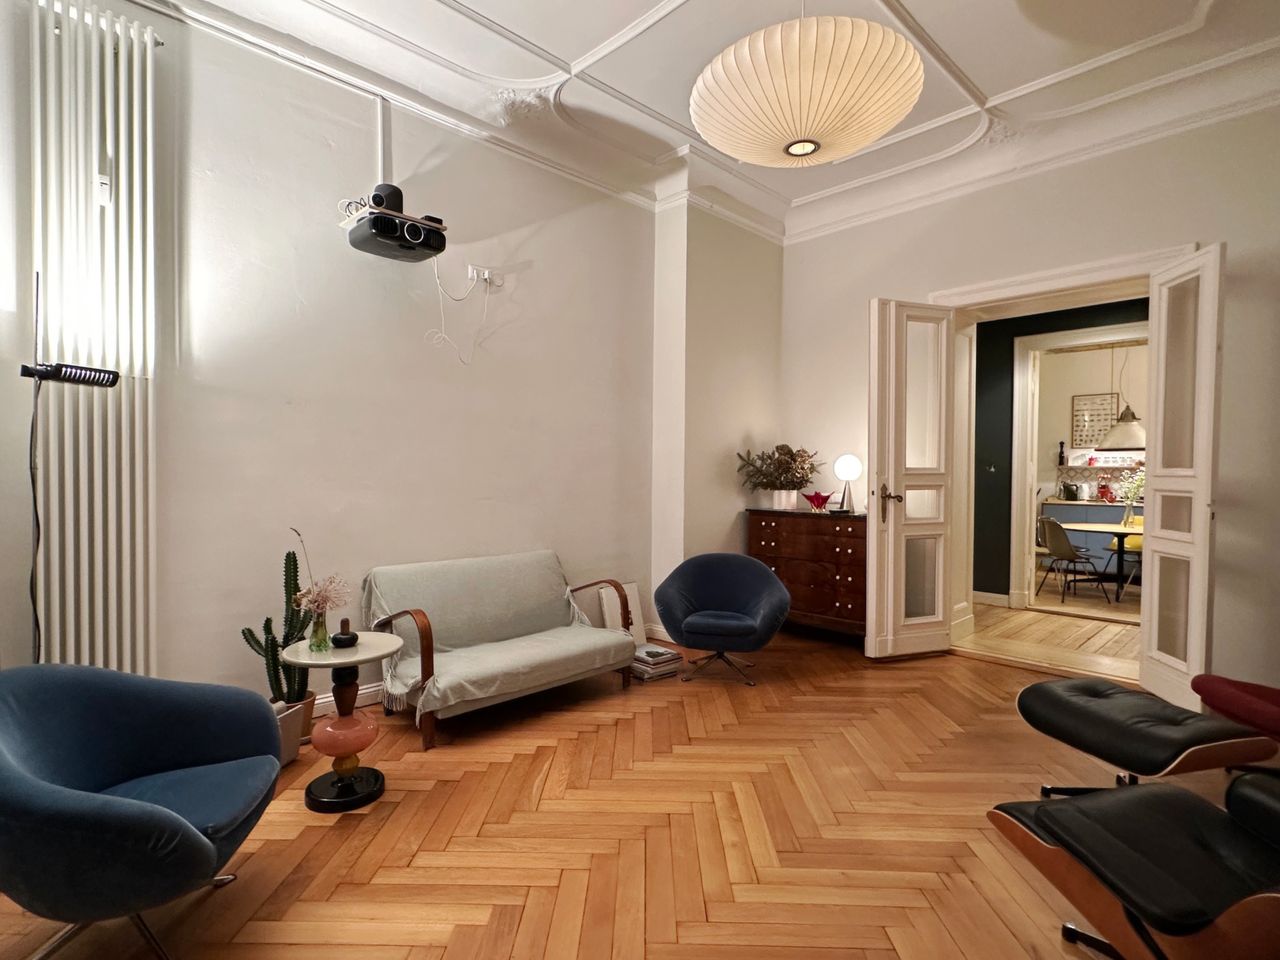 Spacious, carefully refurbished 19th century apartment facing the park